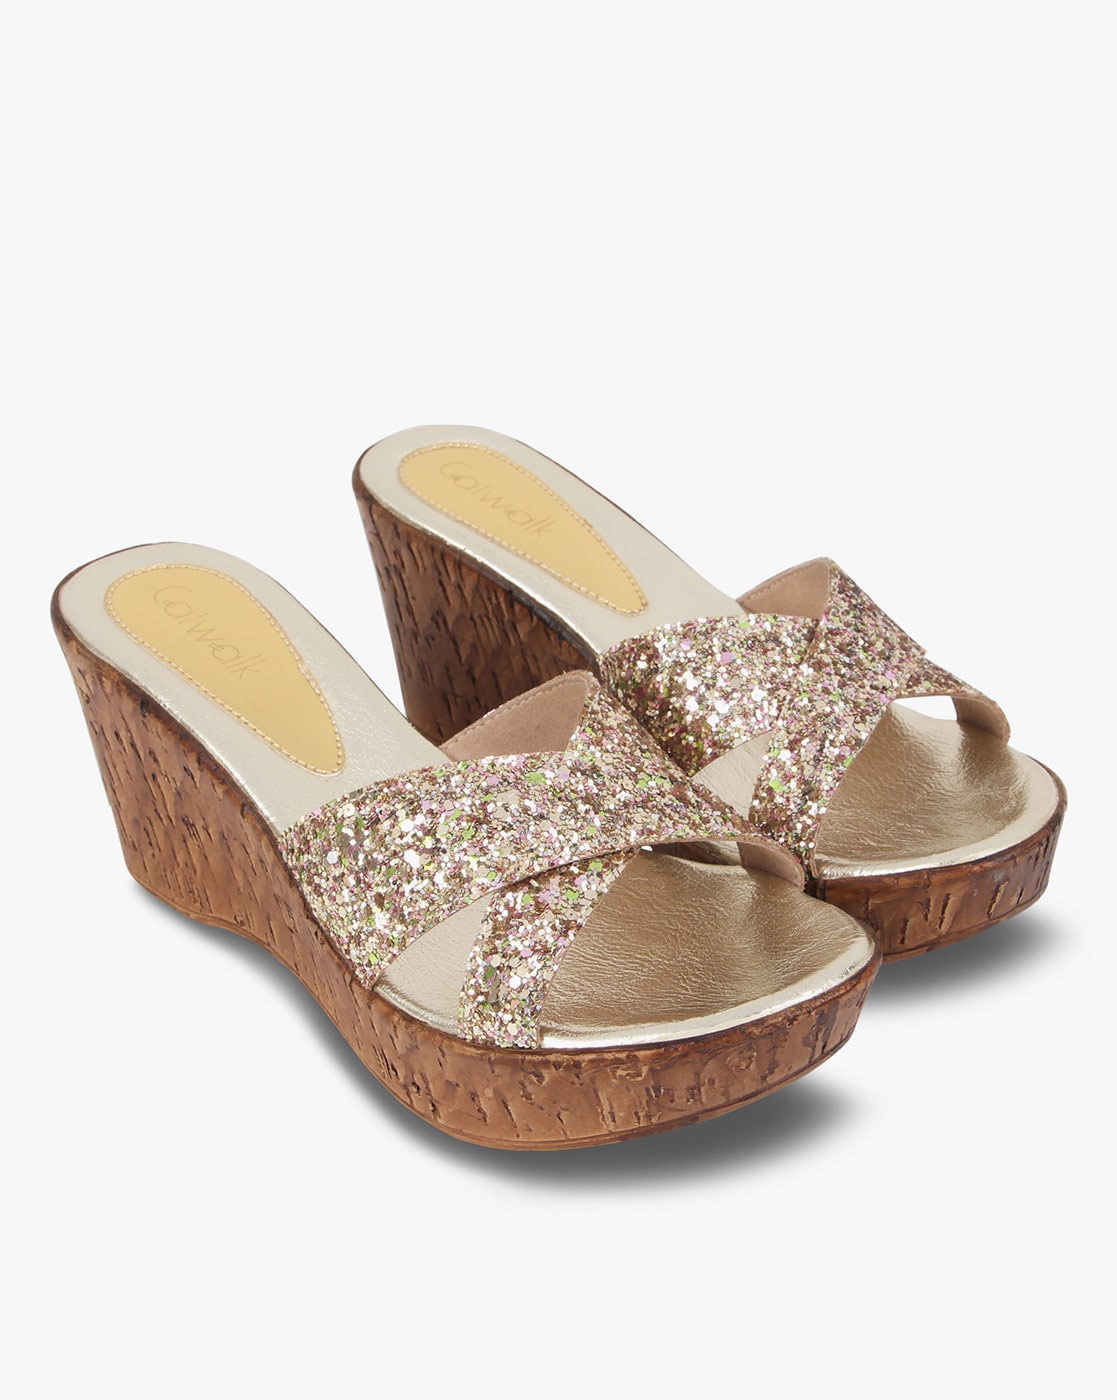 Buy Gold-Toned Heeled Sandals for Women 